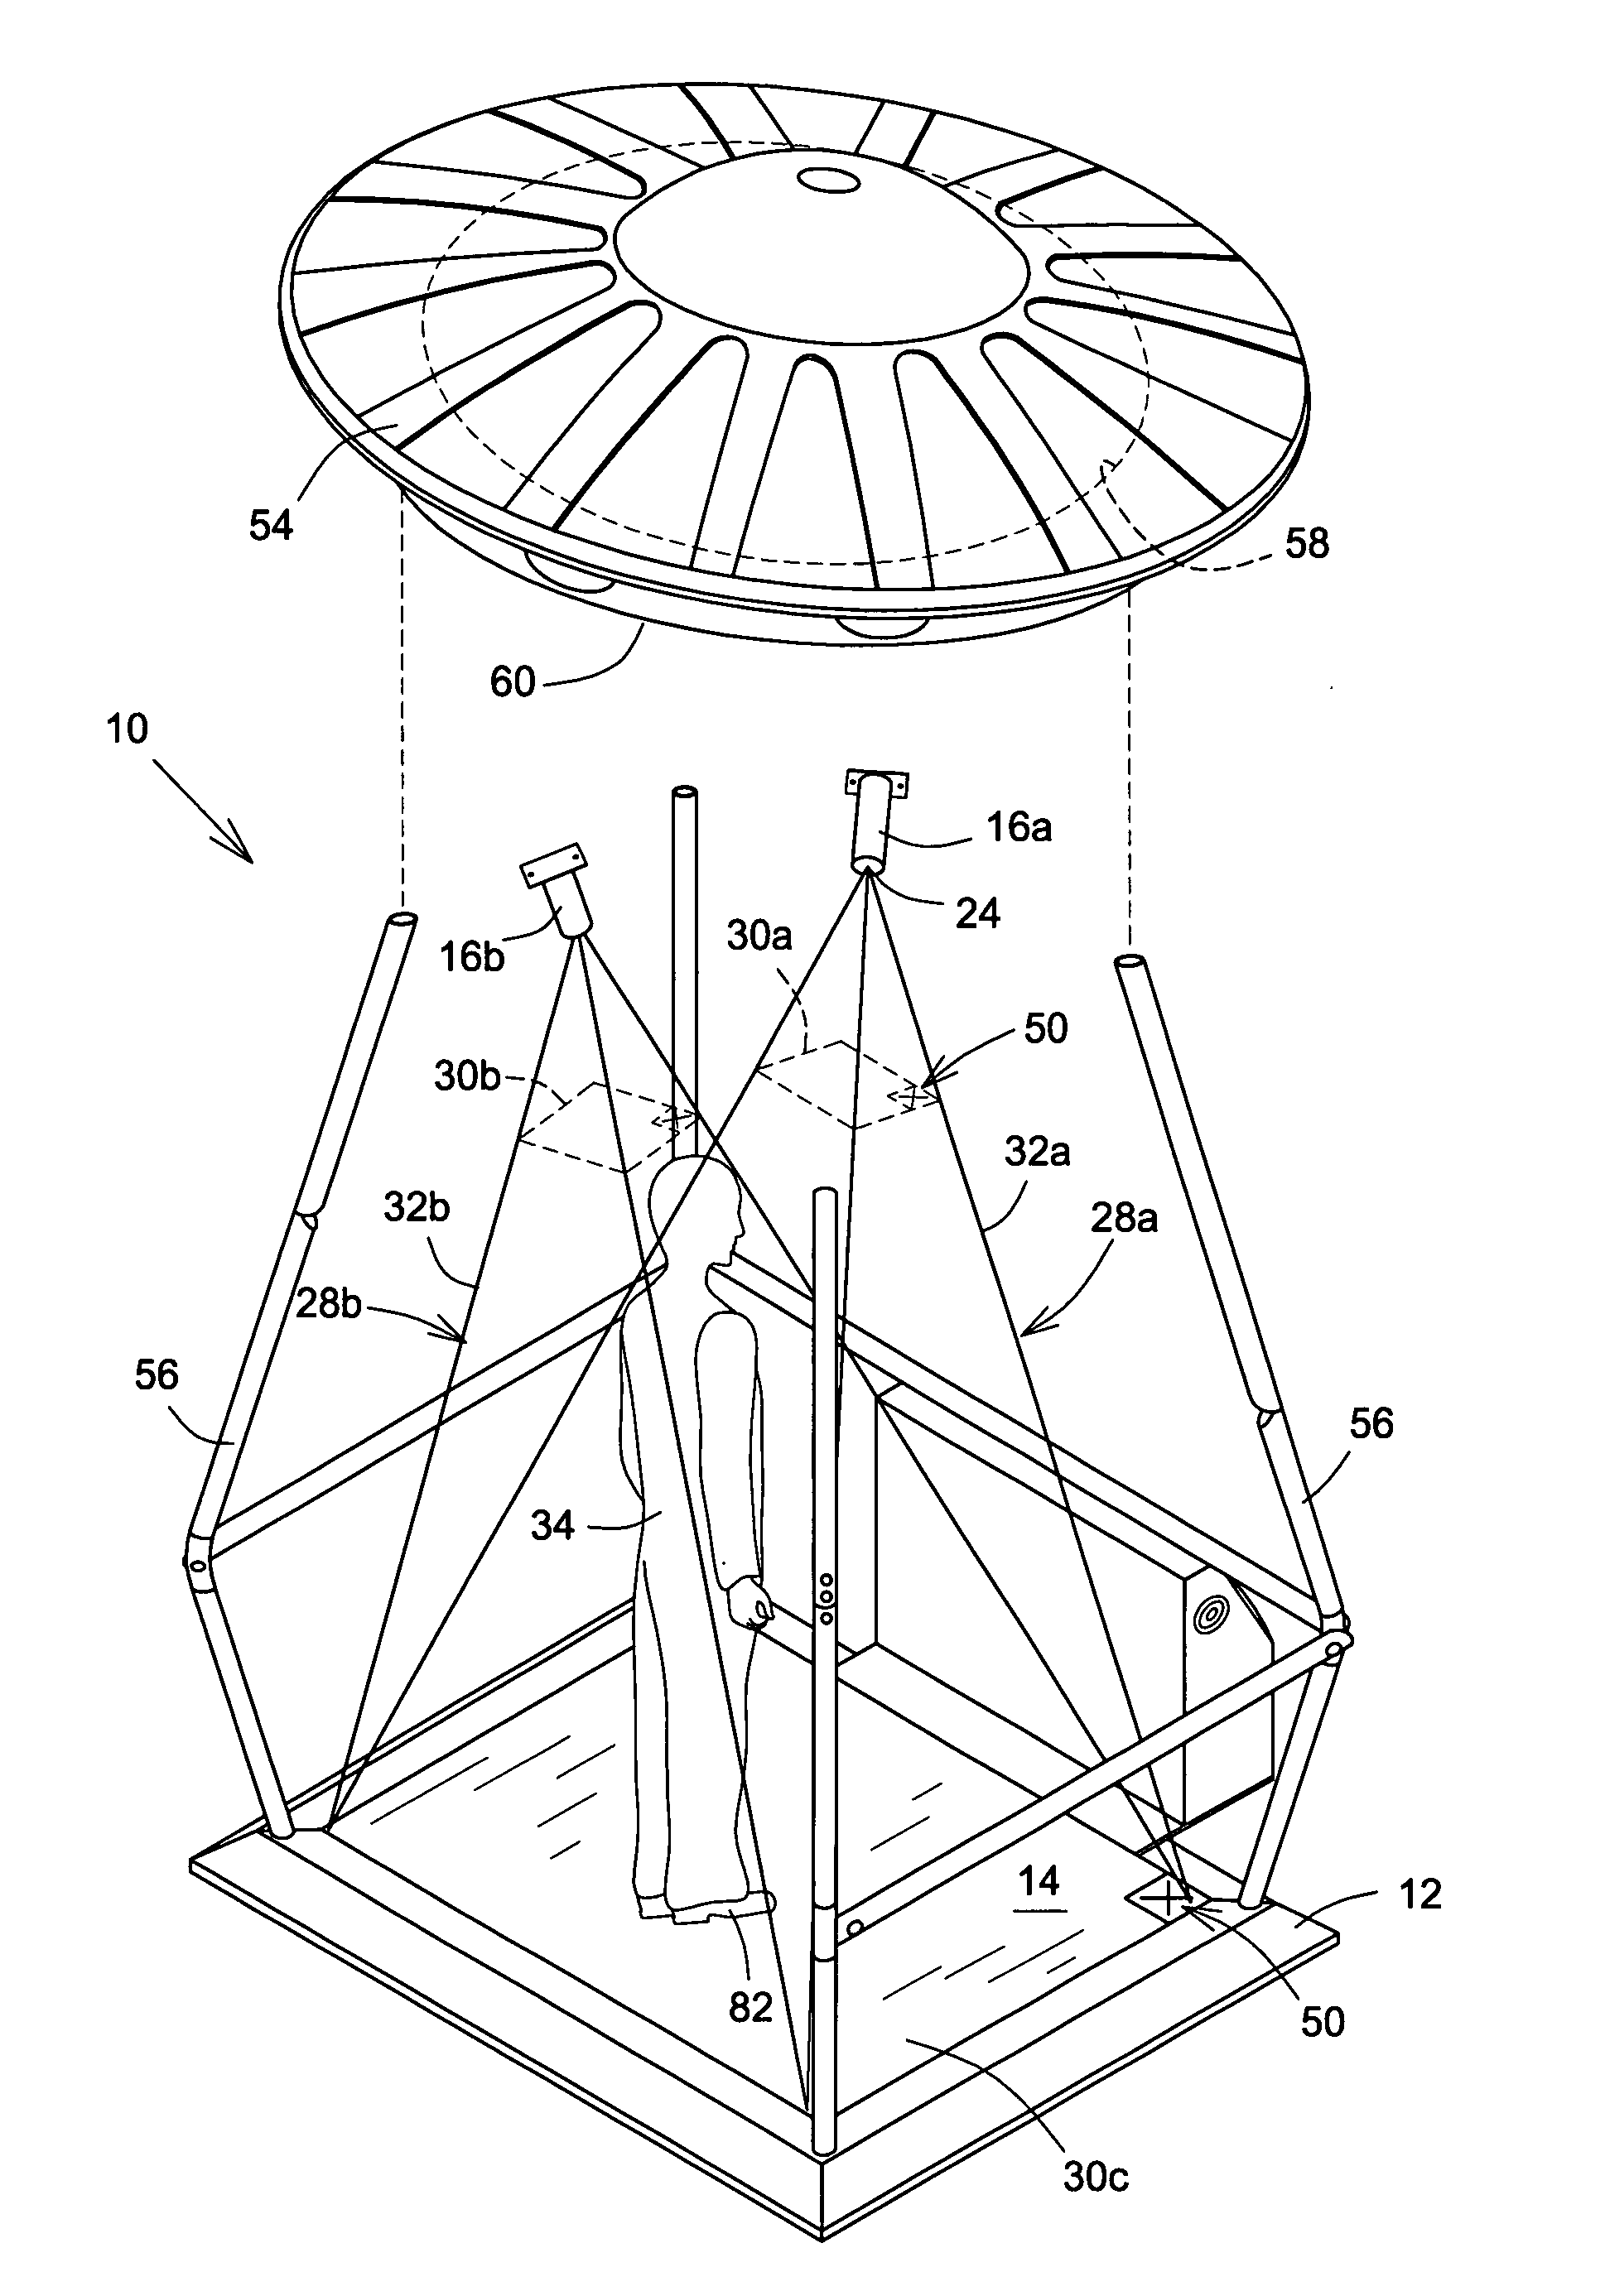 Interactive image projection system and method